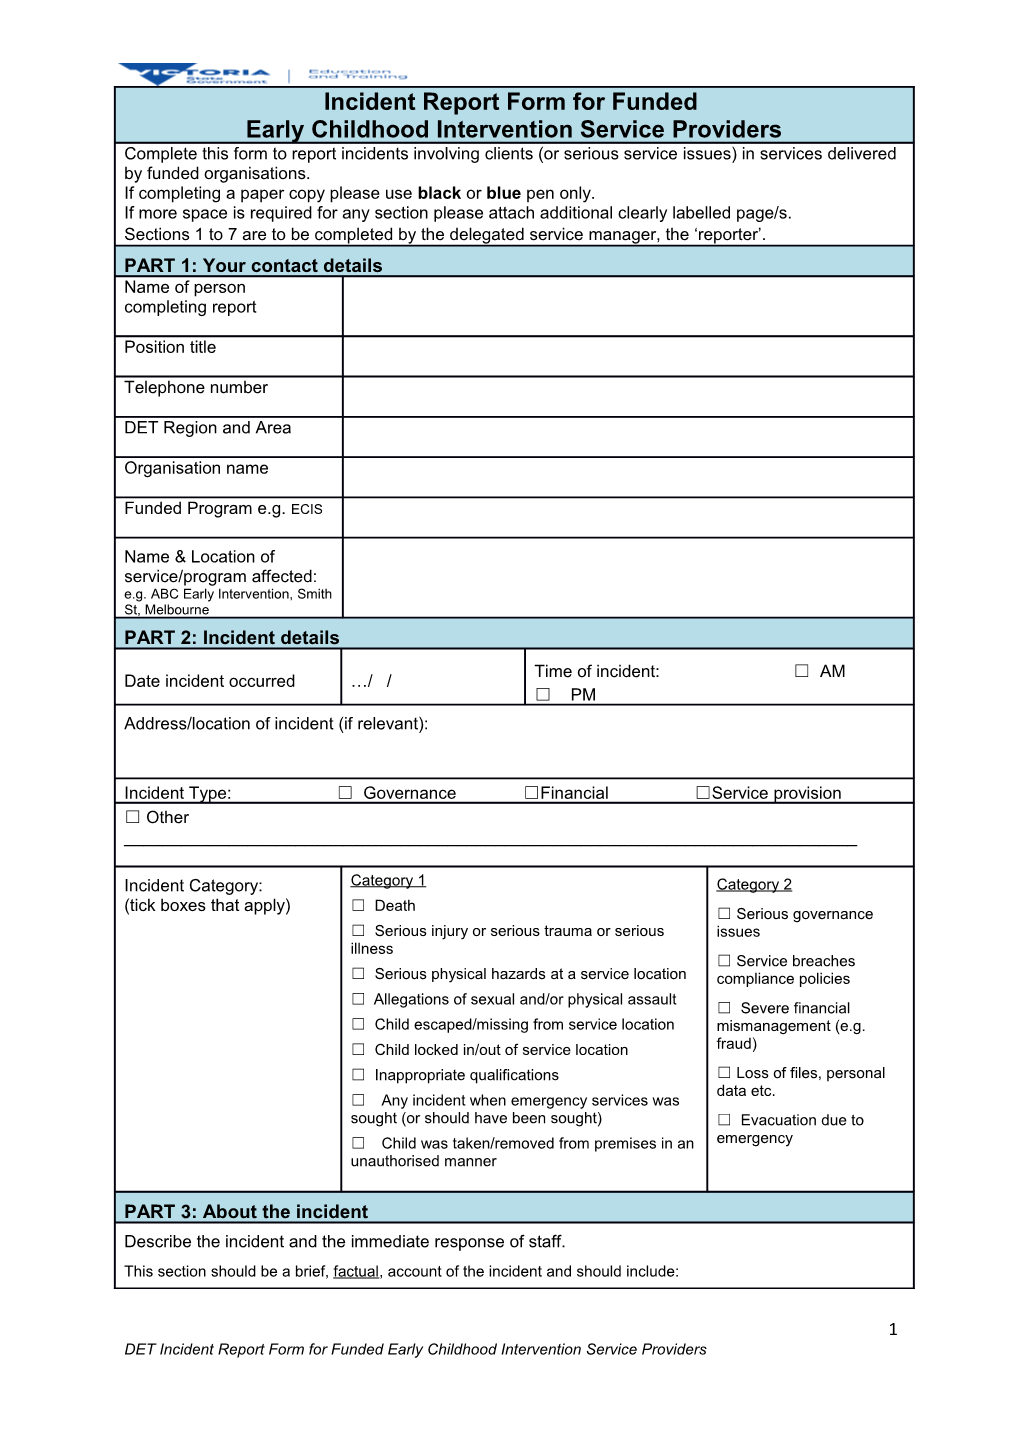 Incident Report Form for Funded ECIS Providers